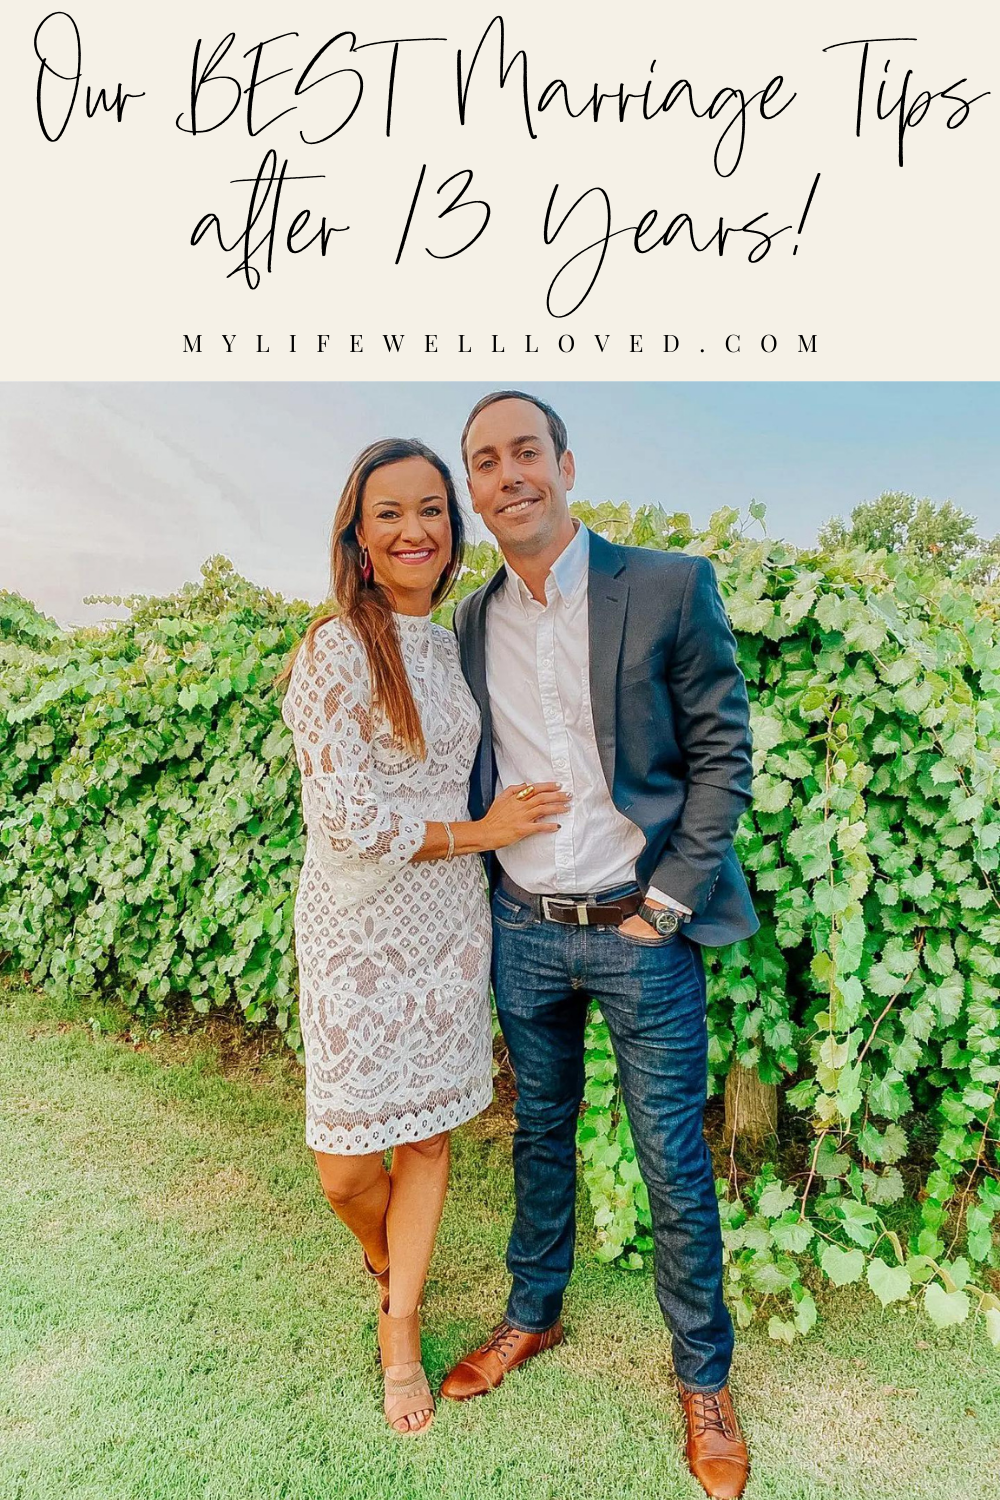 Our Marriage Q&A On The Big, Full Fun Podcast by Alabama marriage + family blogger, Heather Brown // My Life Well Loved